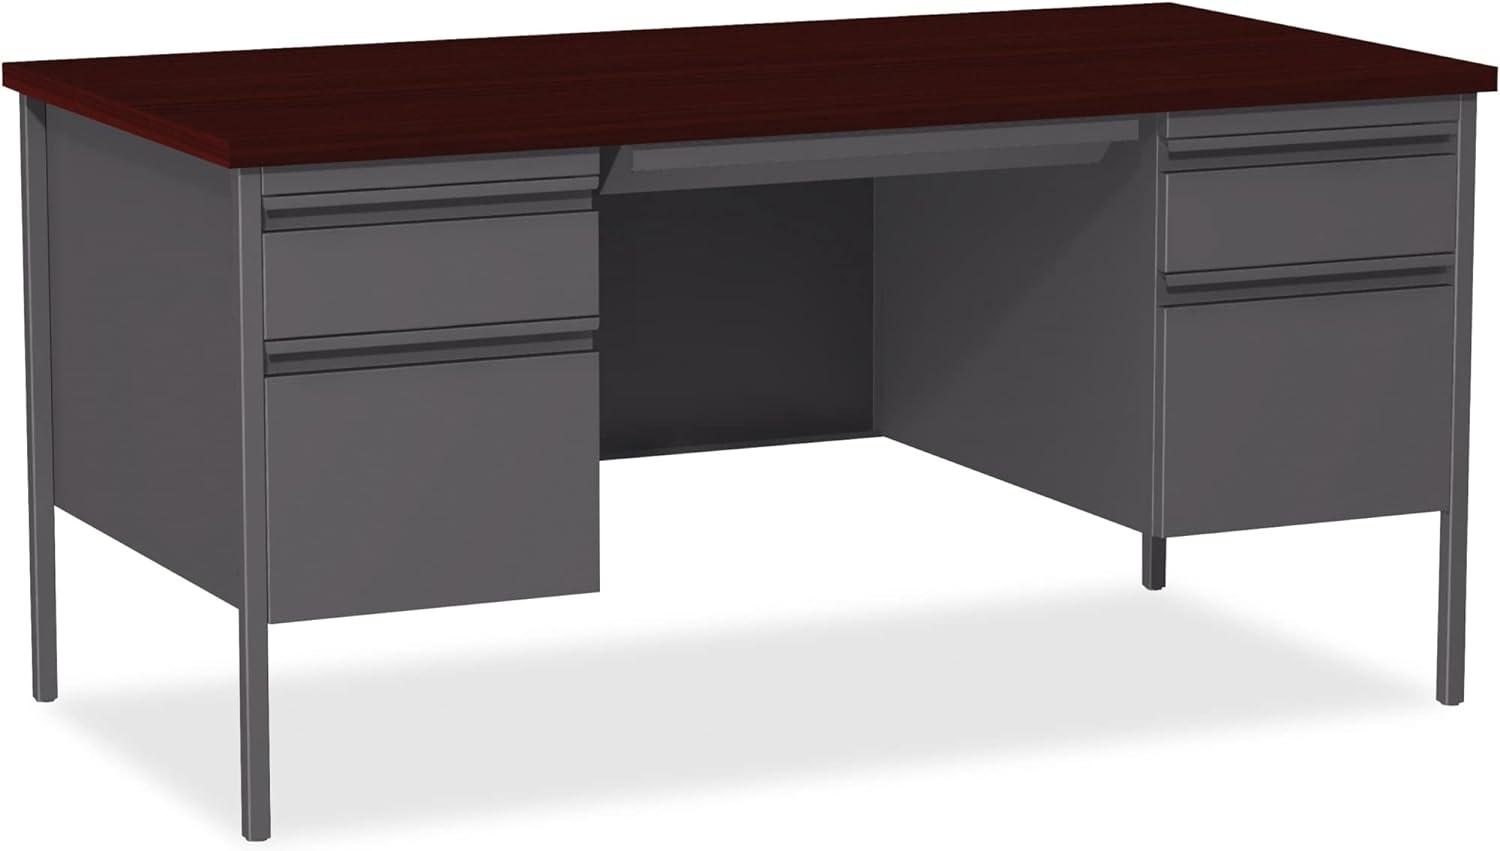 Charcoal Mahogany Executive Desk with Dual Pedestals and Drawer